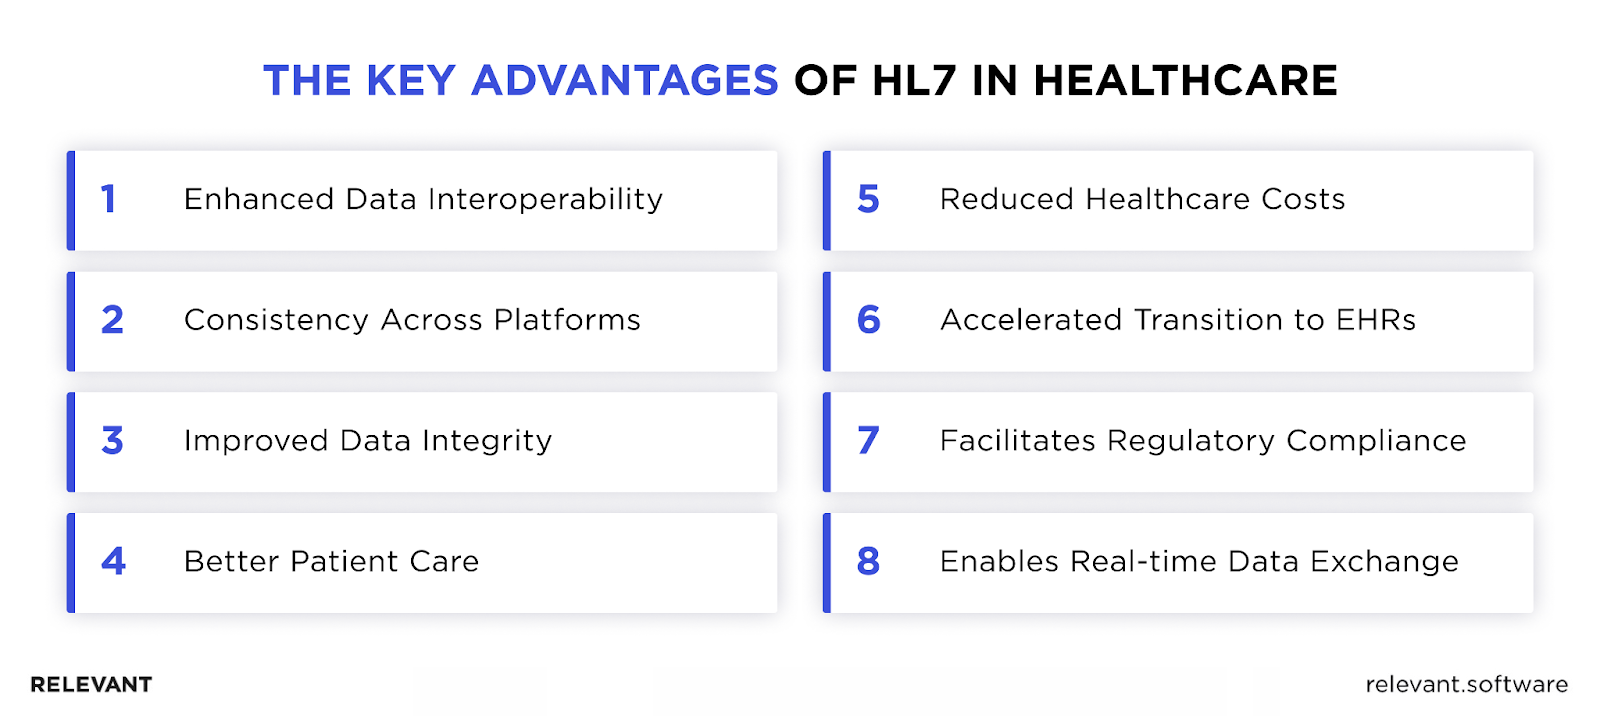 Benefits of HL7 in Healthcare